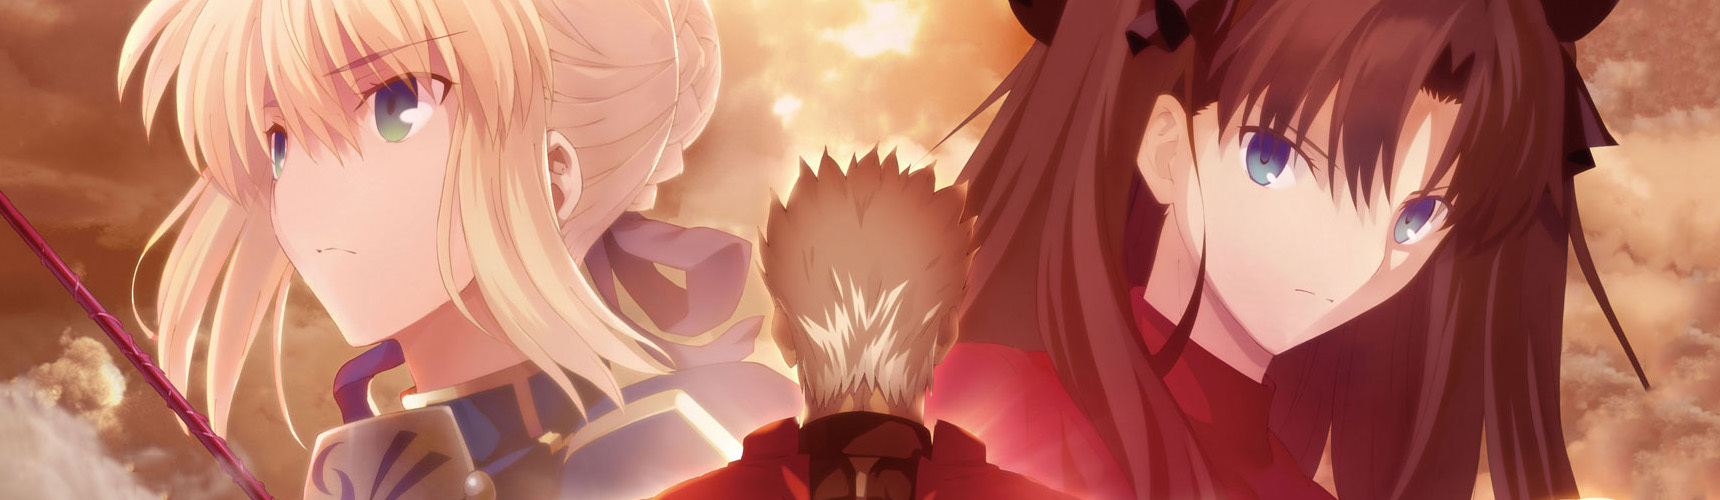 Banner for Fate/stay night: Unlimited Blade Works 2nd Season